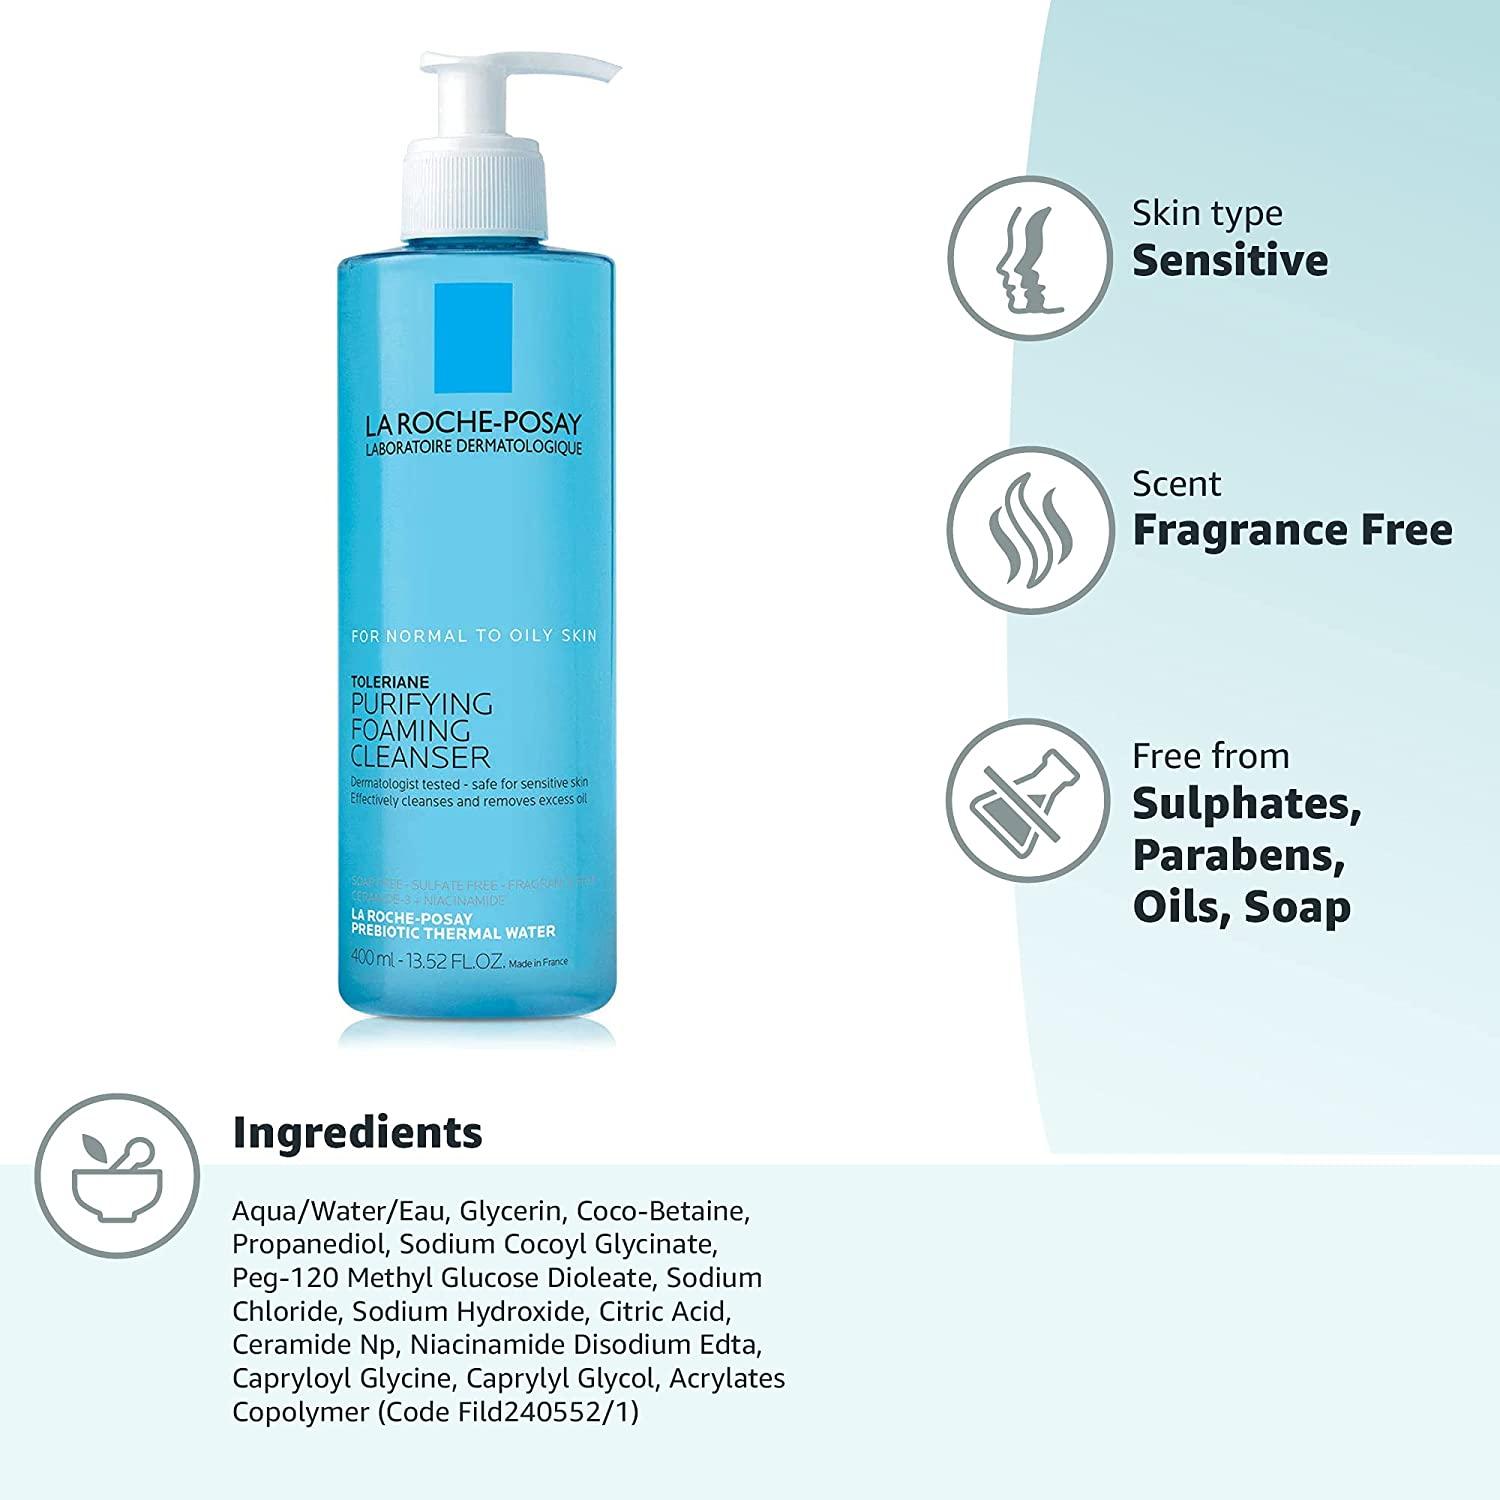 La Roche-Posay Toleriane Purifying Foaming Facial Cleanser, Oil Free Face Wash for Oily Skin and for Sensitive Skin with Pore Cleanser Wont Dry Out Skin, Unscented 13.52 Fl Oz (Pack of